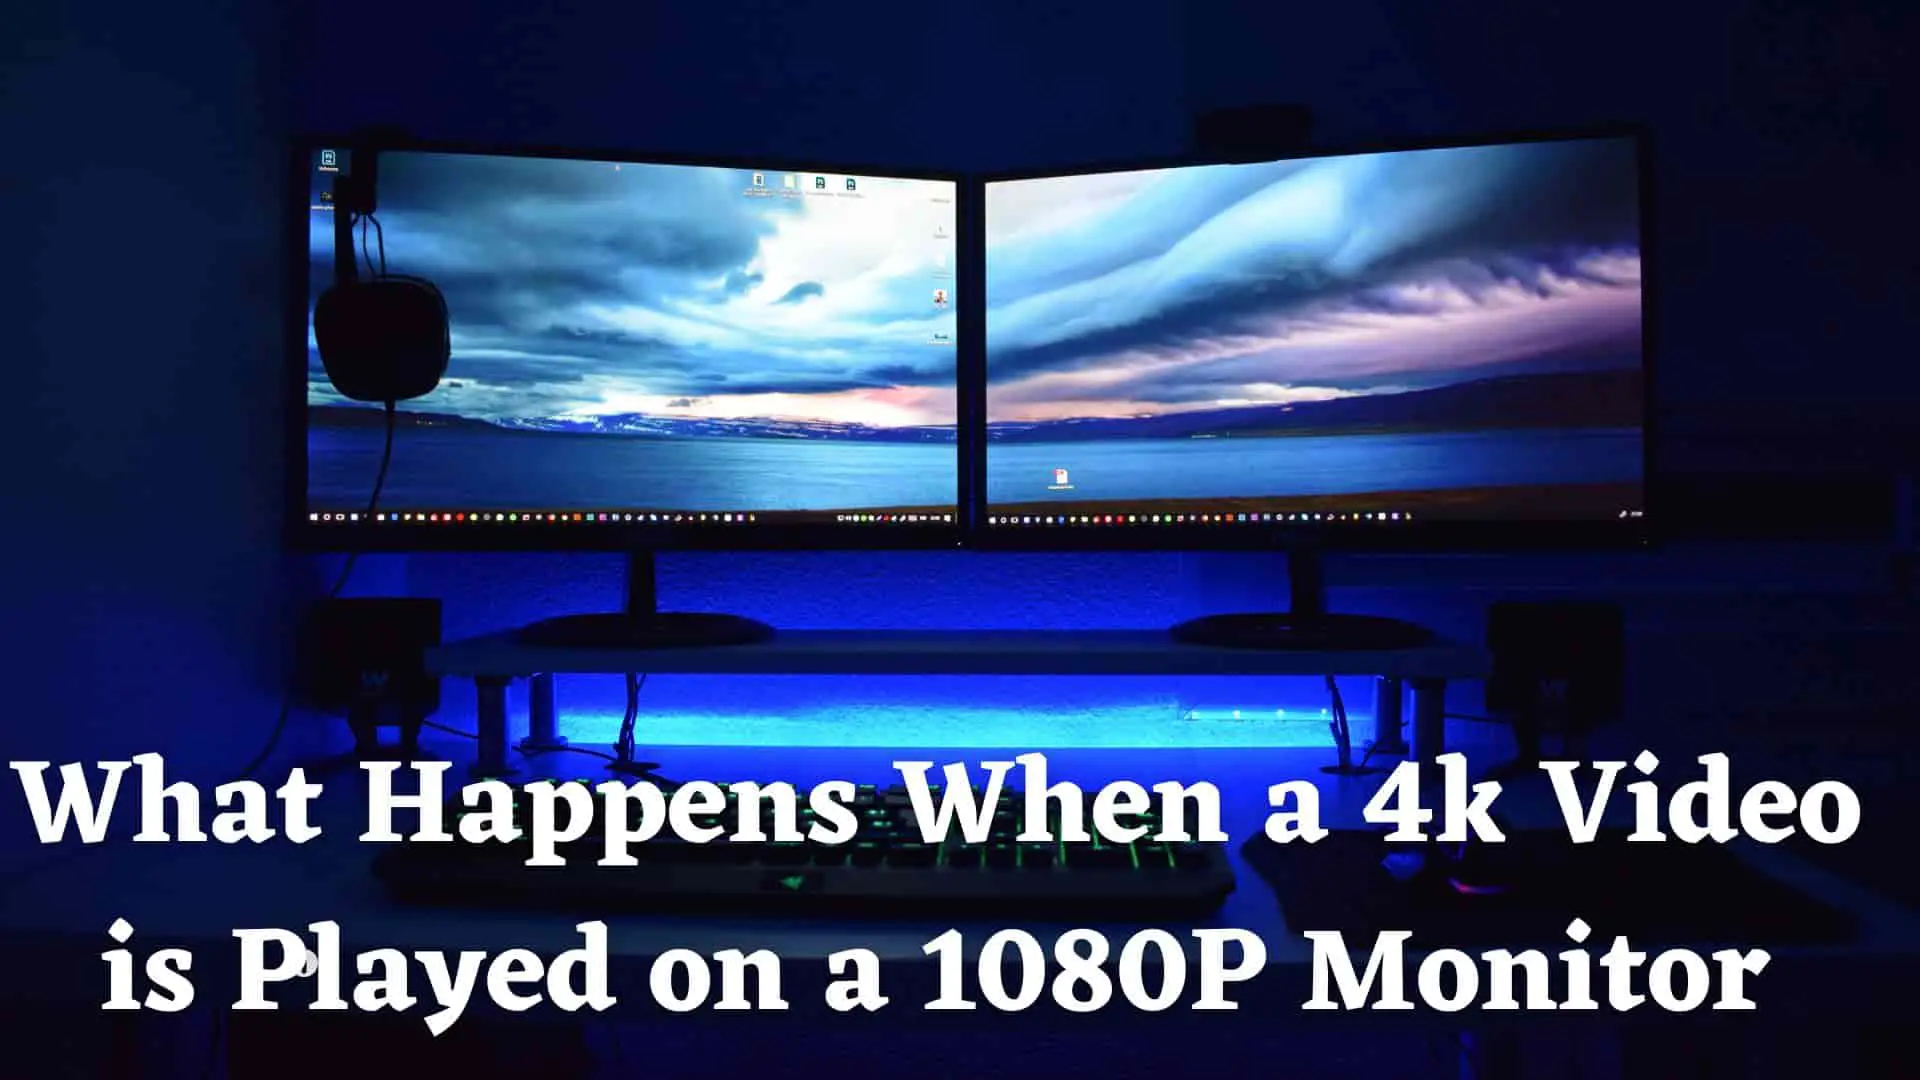 what-happens-if-4k-video-played-on-small-screen-like-1080p